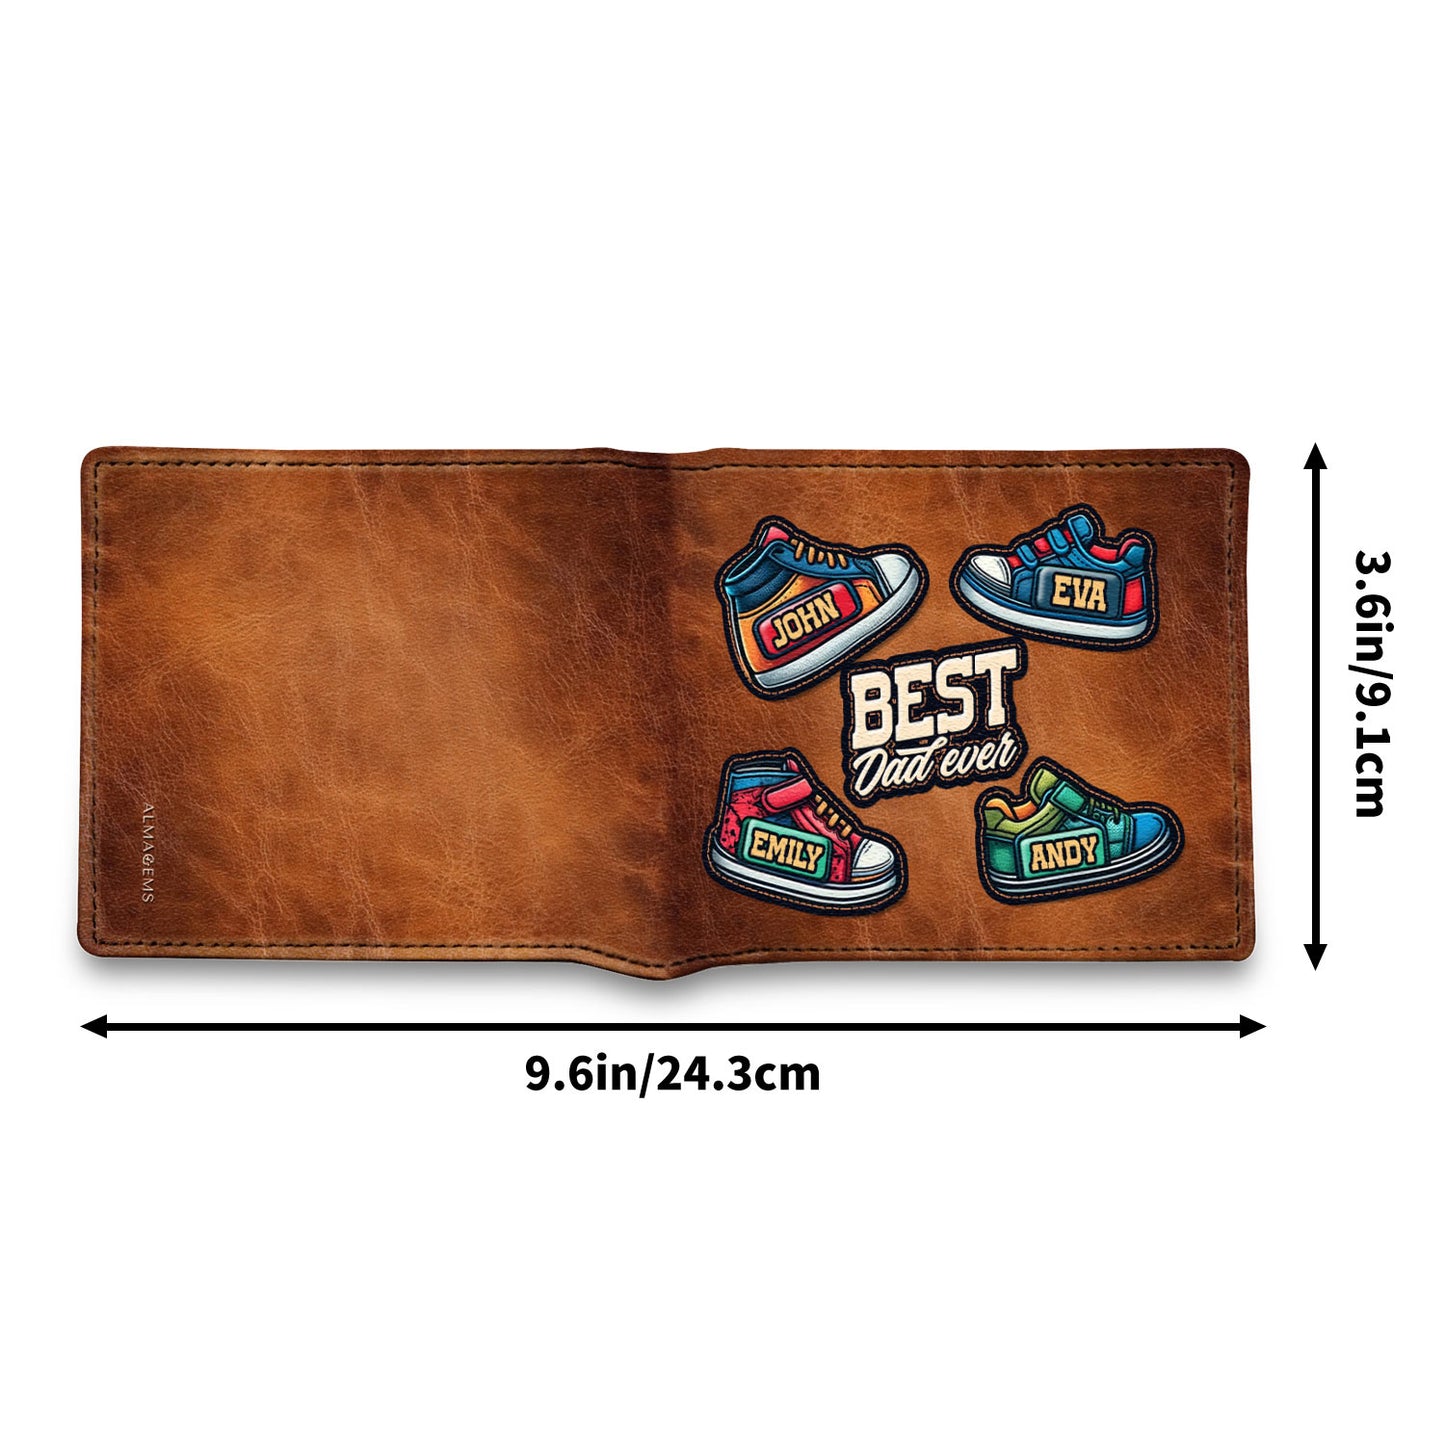 Best Dad Ever Snickers - Men's Leather Wallet - MW23